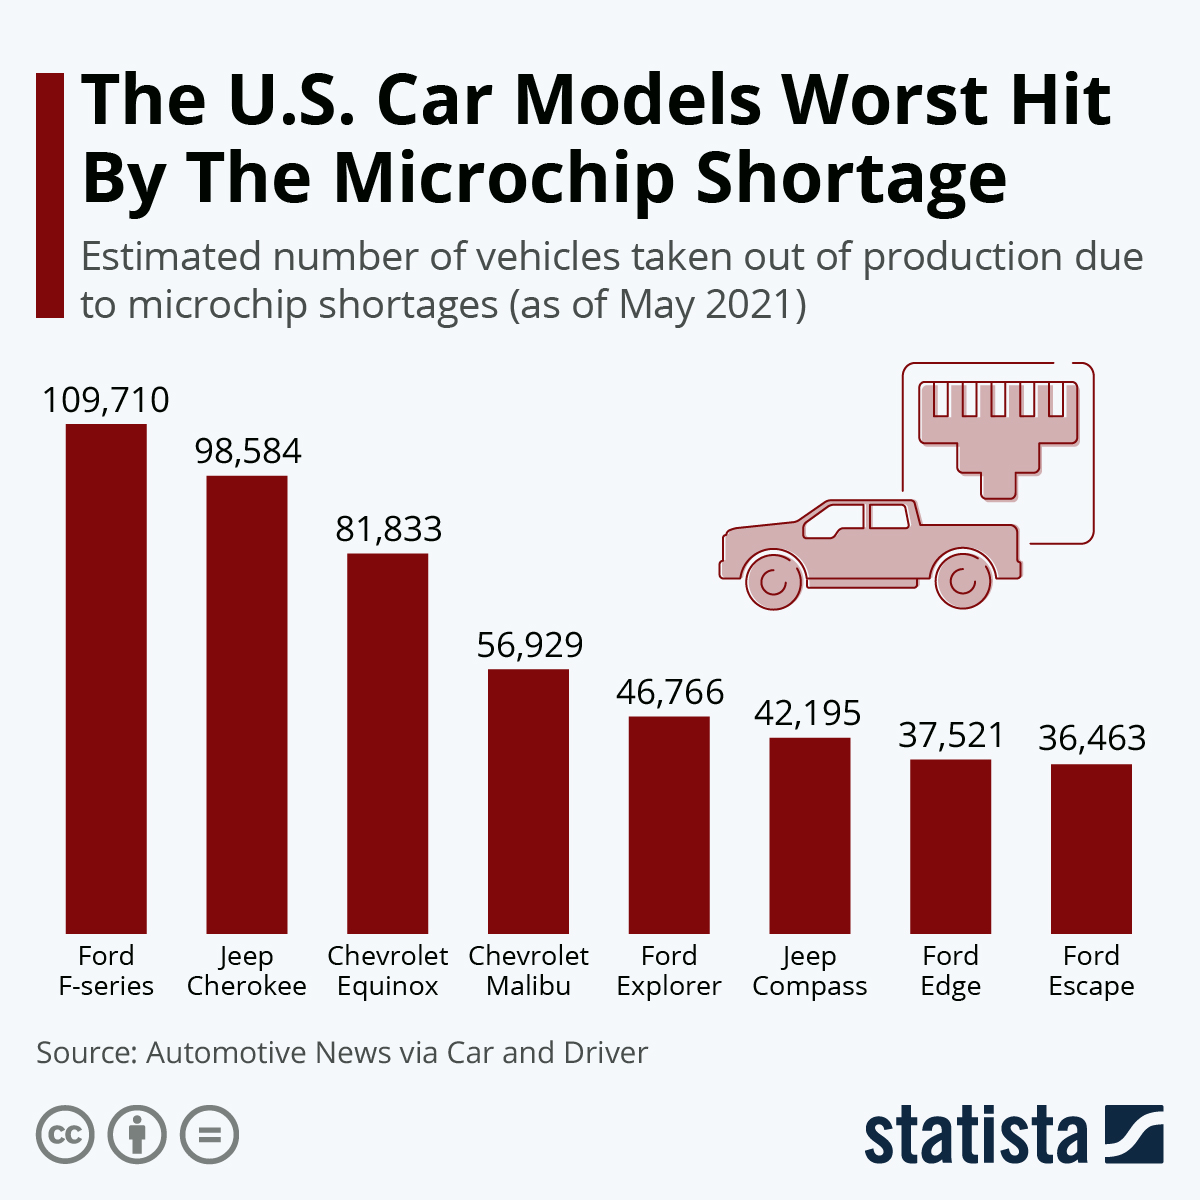 The U.S. Car Models Worst Hit By The Microchip Shortage